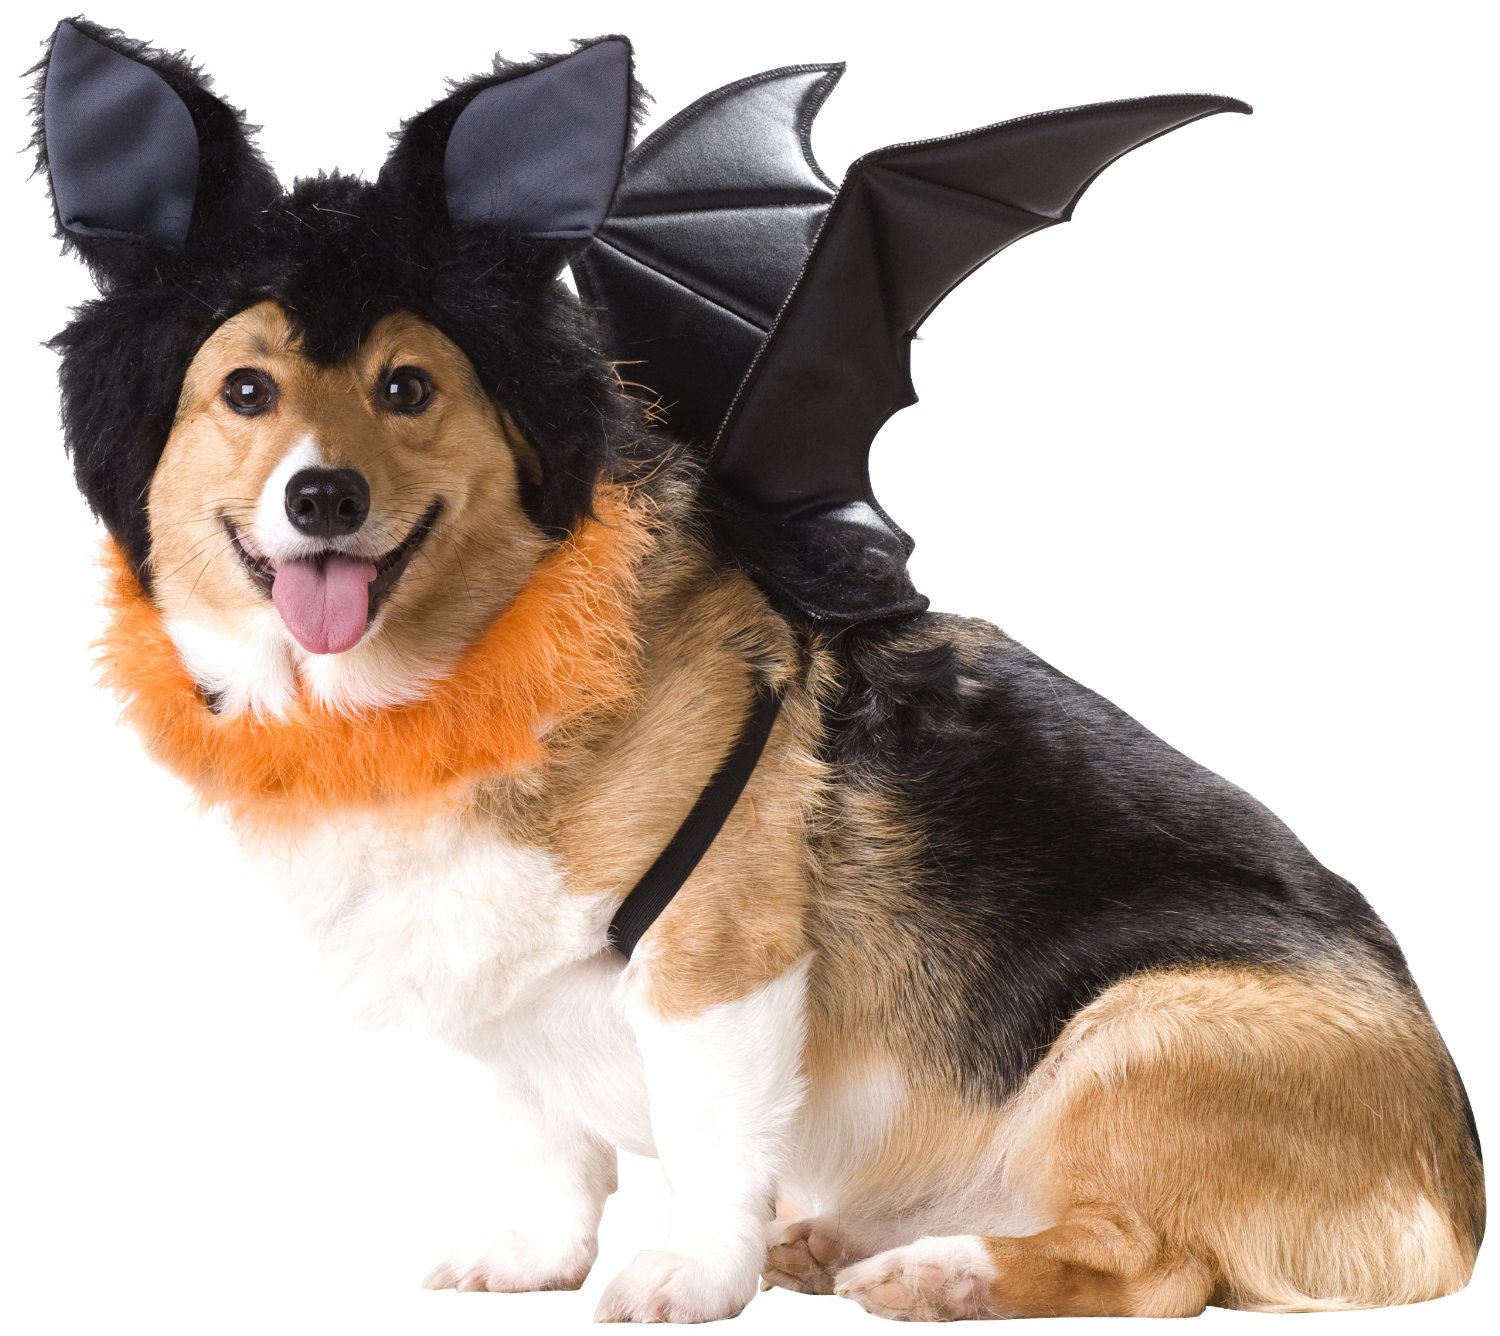 Dogs In Ridiculous Halloween Costumes. How Shameful!